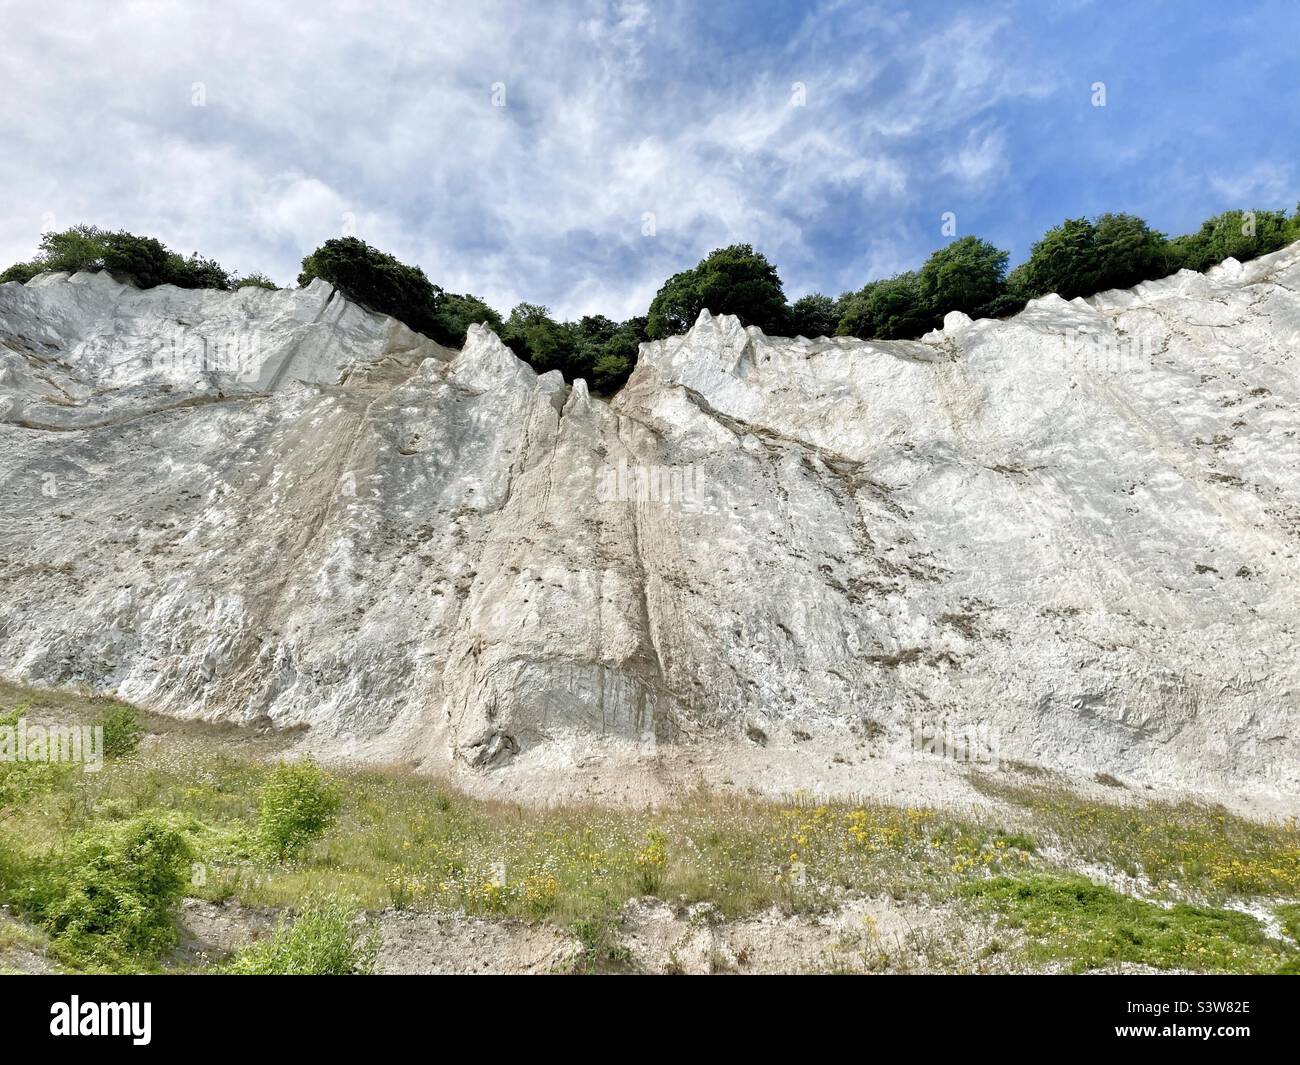 The White chalk cliffs of Mons Clint Pictured from below Stock Photo